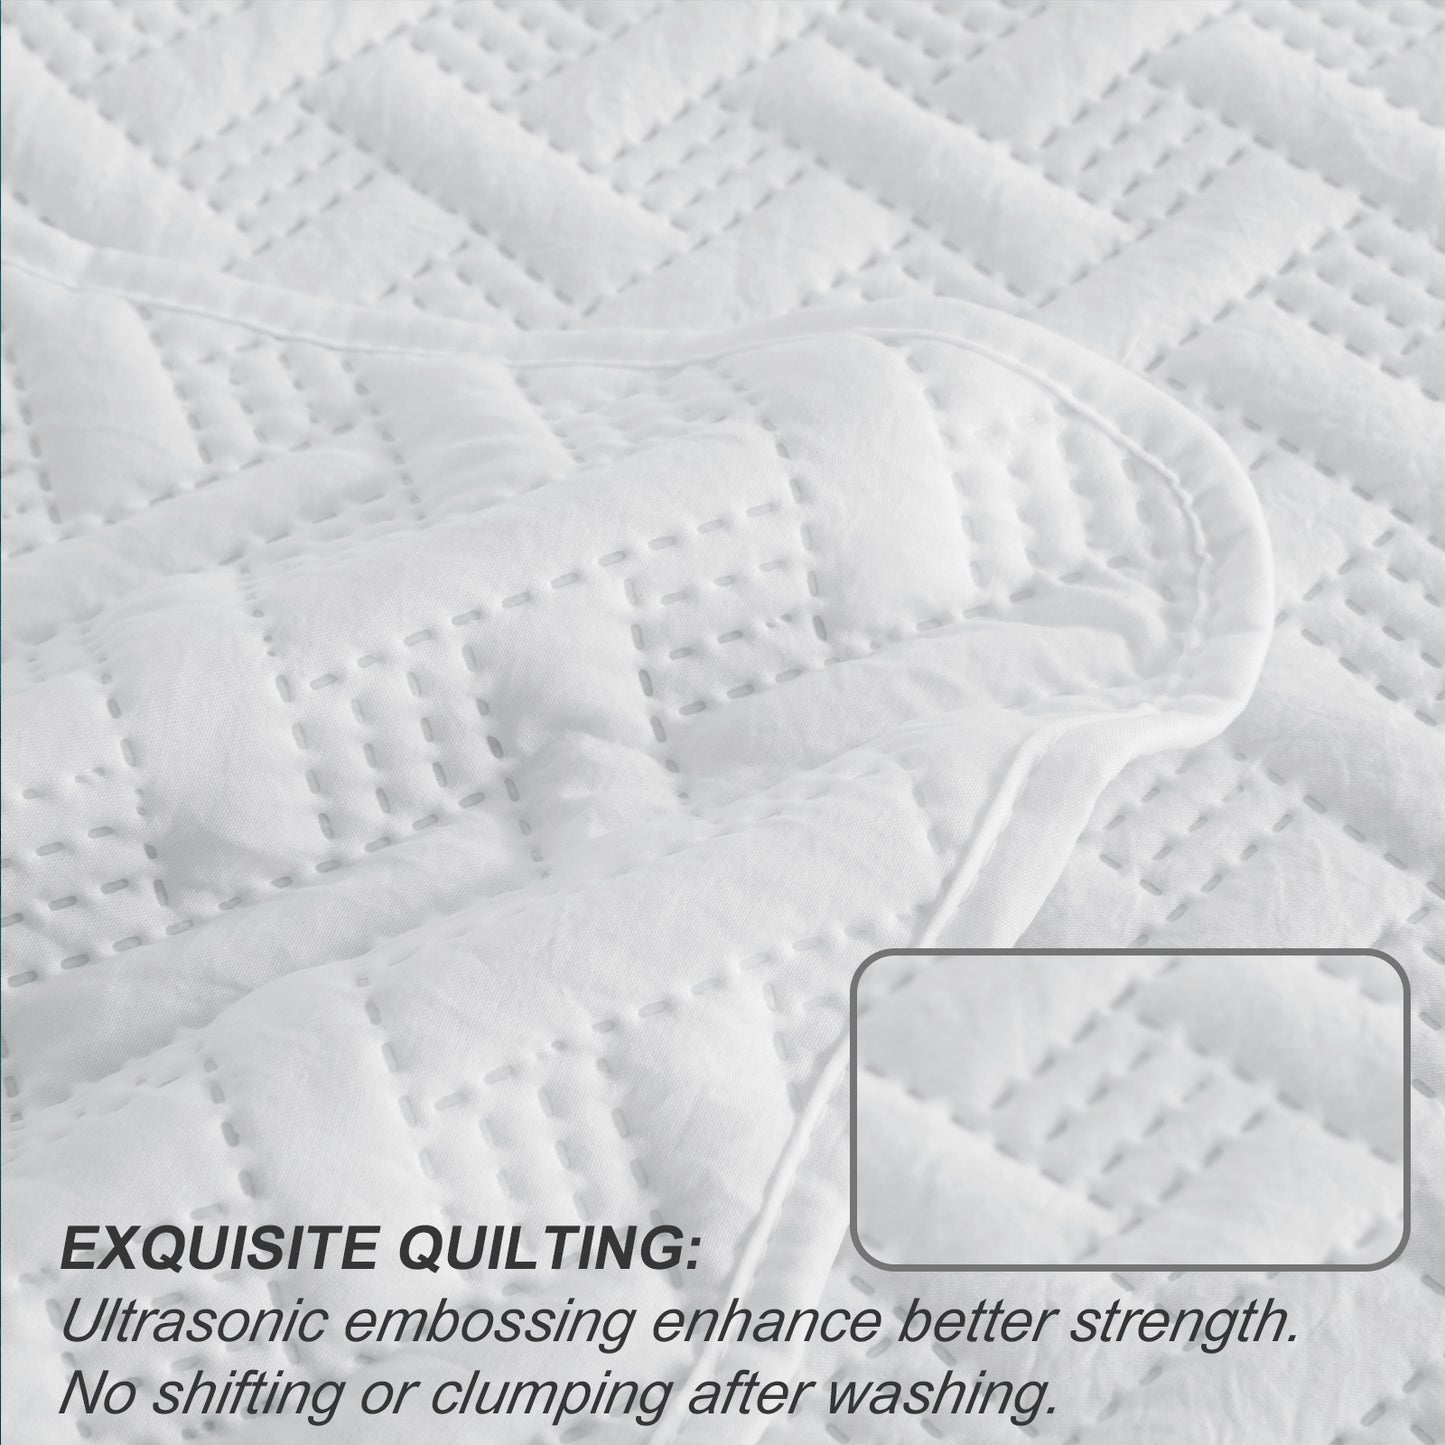 Exclusivo Mezcla 2-Piece White Twin Size Quilt Set, Weave Pattern Ultrasonic Lightweight and Soft Quilts/Bedspreads/Coverlets/Bedding Set (1 Quilt, 1 Pillow Sham) for All Seasons